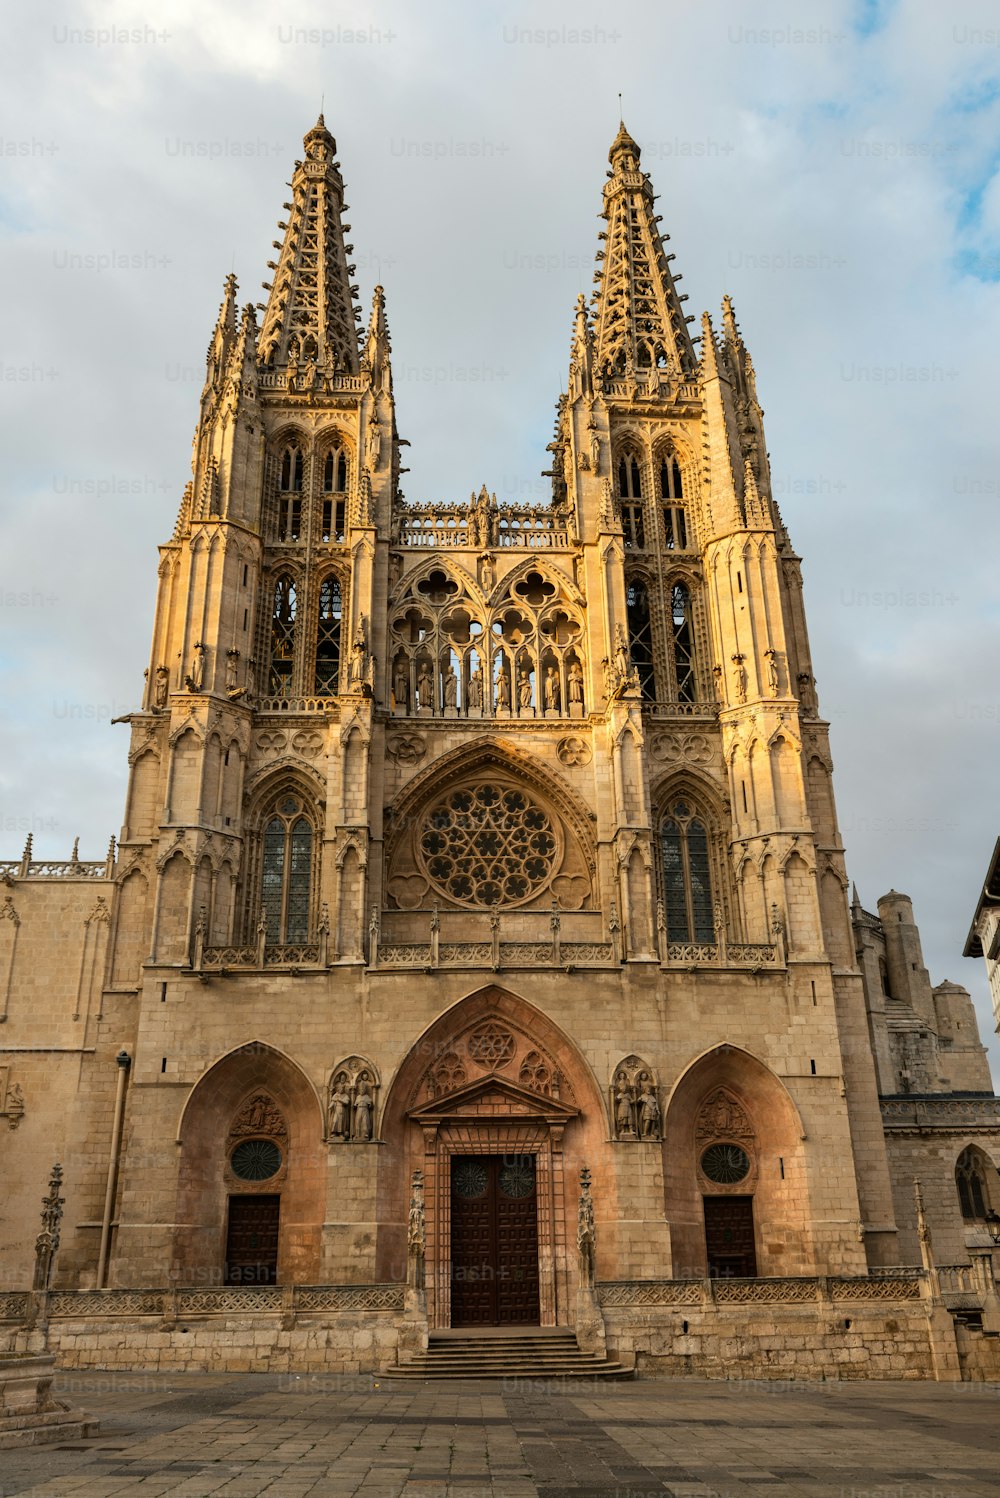 Side view of the two western Flamboyant spires of the Gothic Roman Catholic cathedral in Burgos (1221-1567) illuminated by the setting sun, Spain.